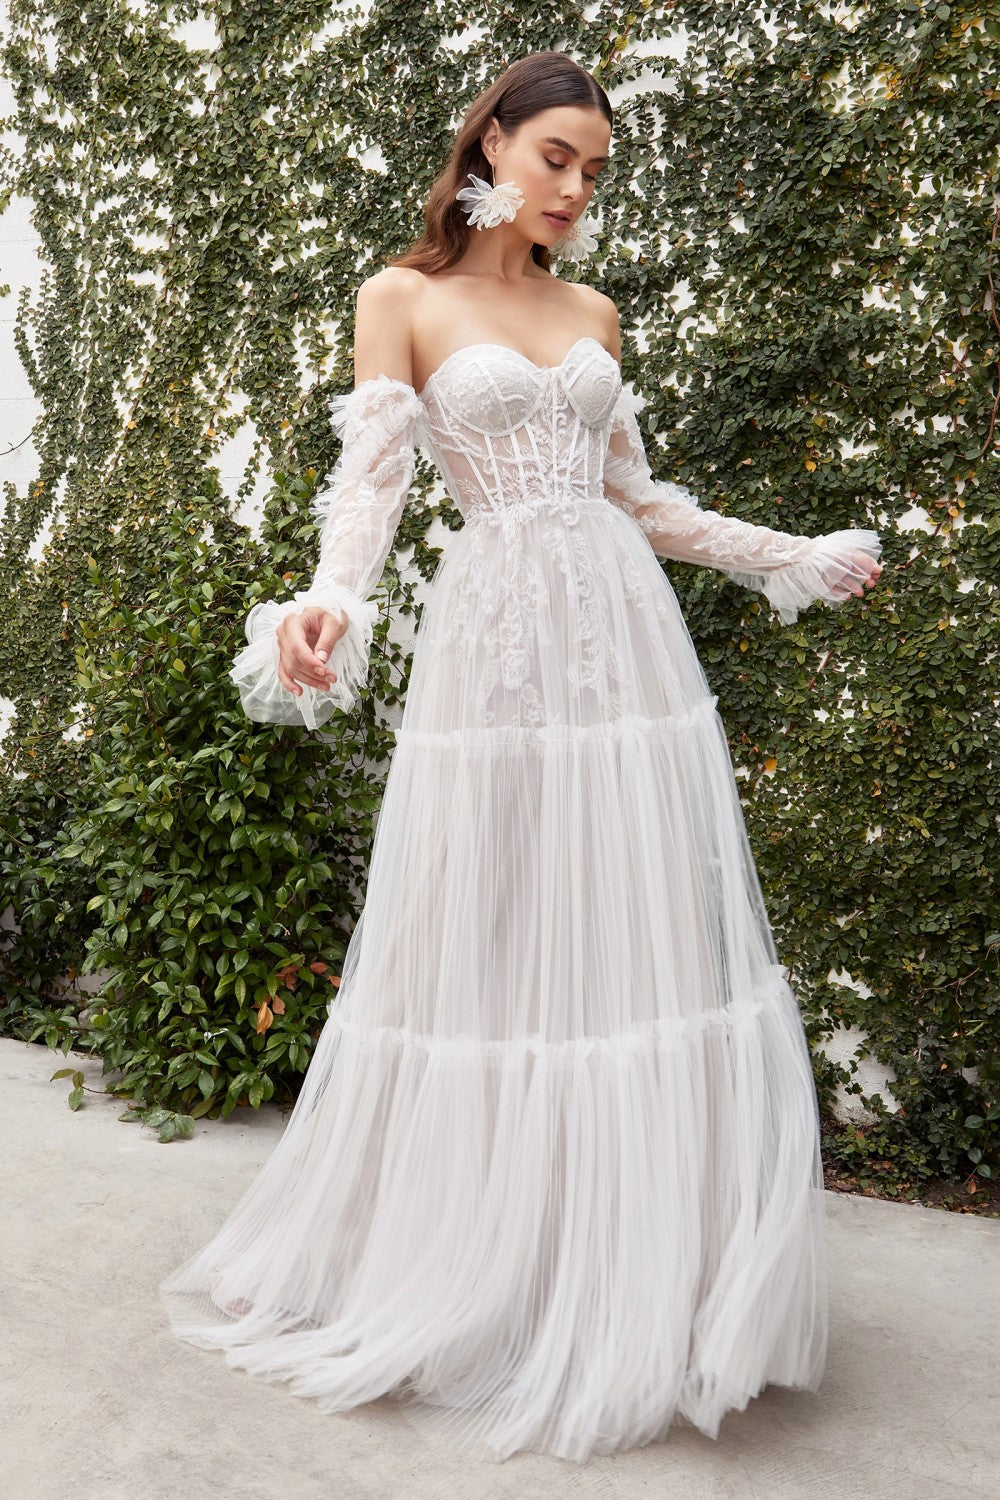 Buy Bridal dress with removable sleeves on SMCDress.com | Bridal gowns  mermaid, Strapless wedding dress, Bridal gown fitting